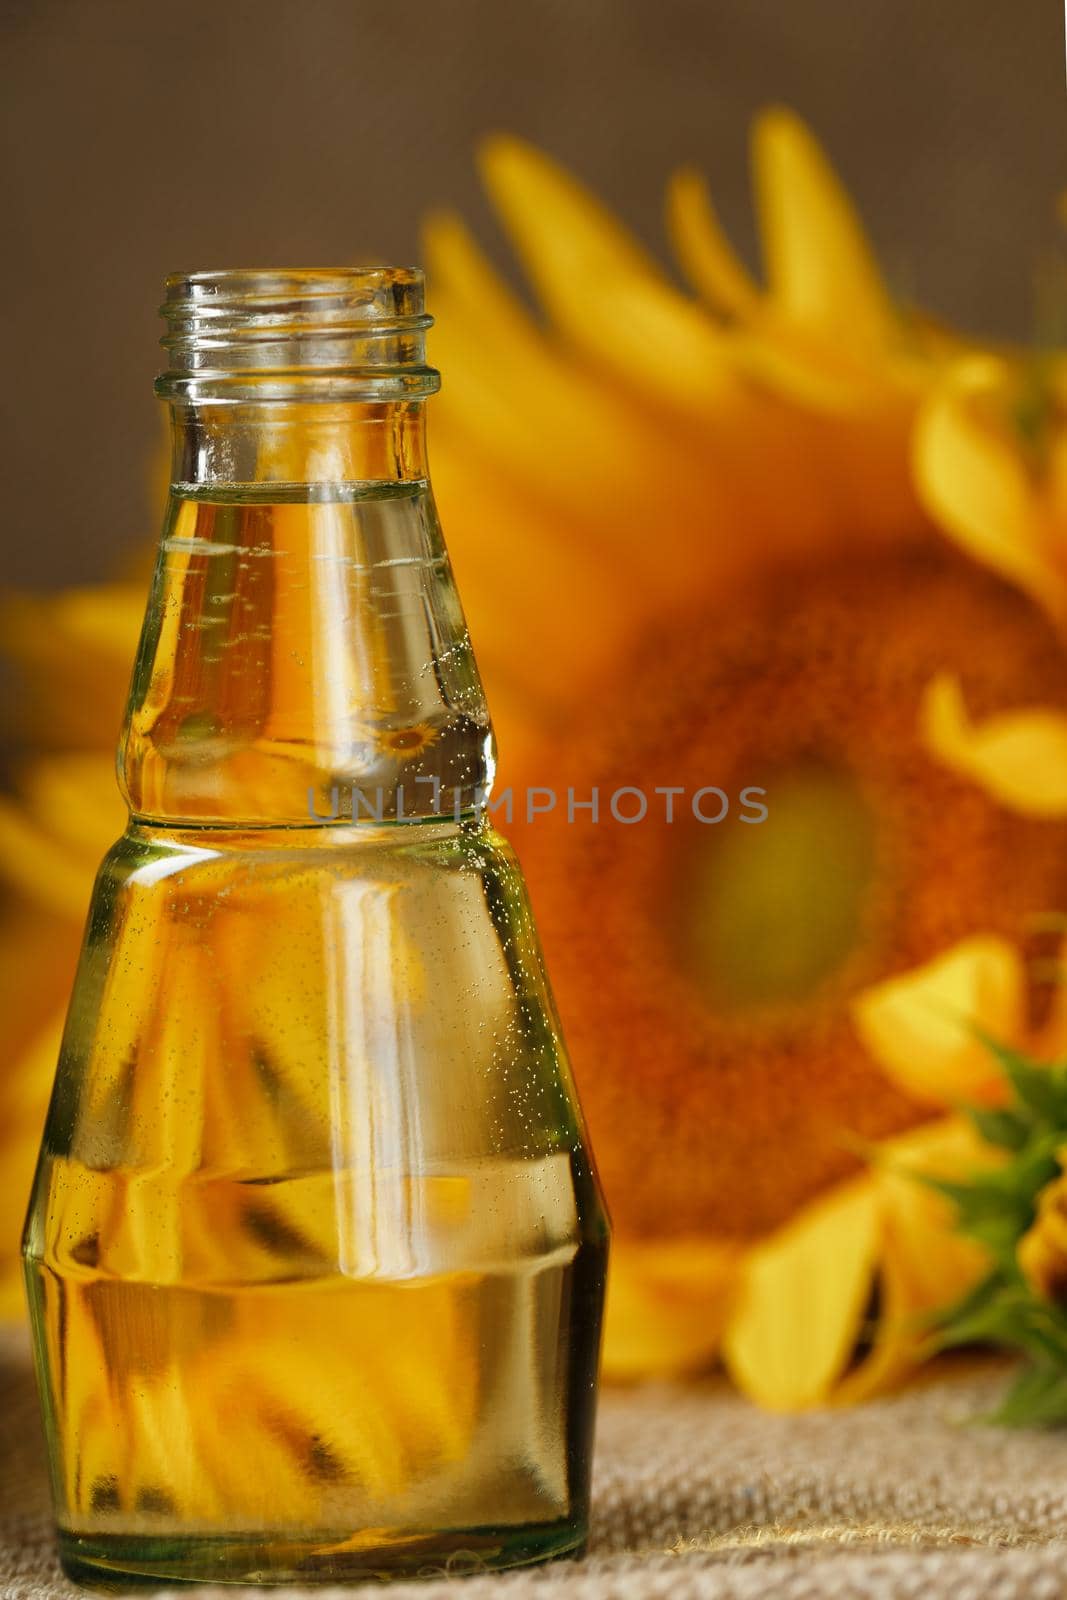 Sunflower oil in a glass bottle and flowers on a wooden background, close-up. Composition in the village style. The concept of a bio-organic product. The vertical composition.